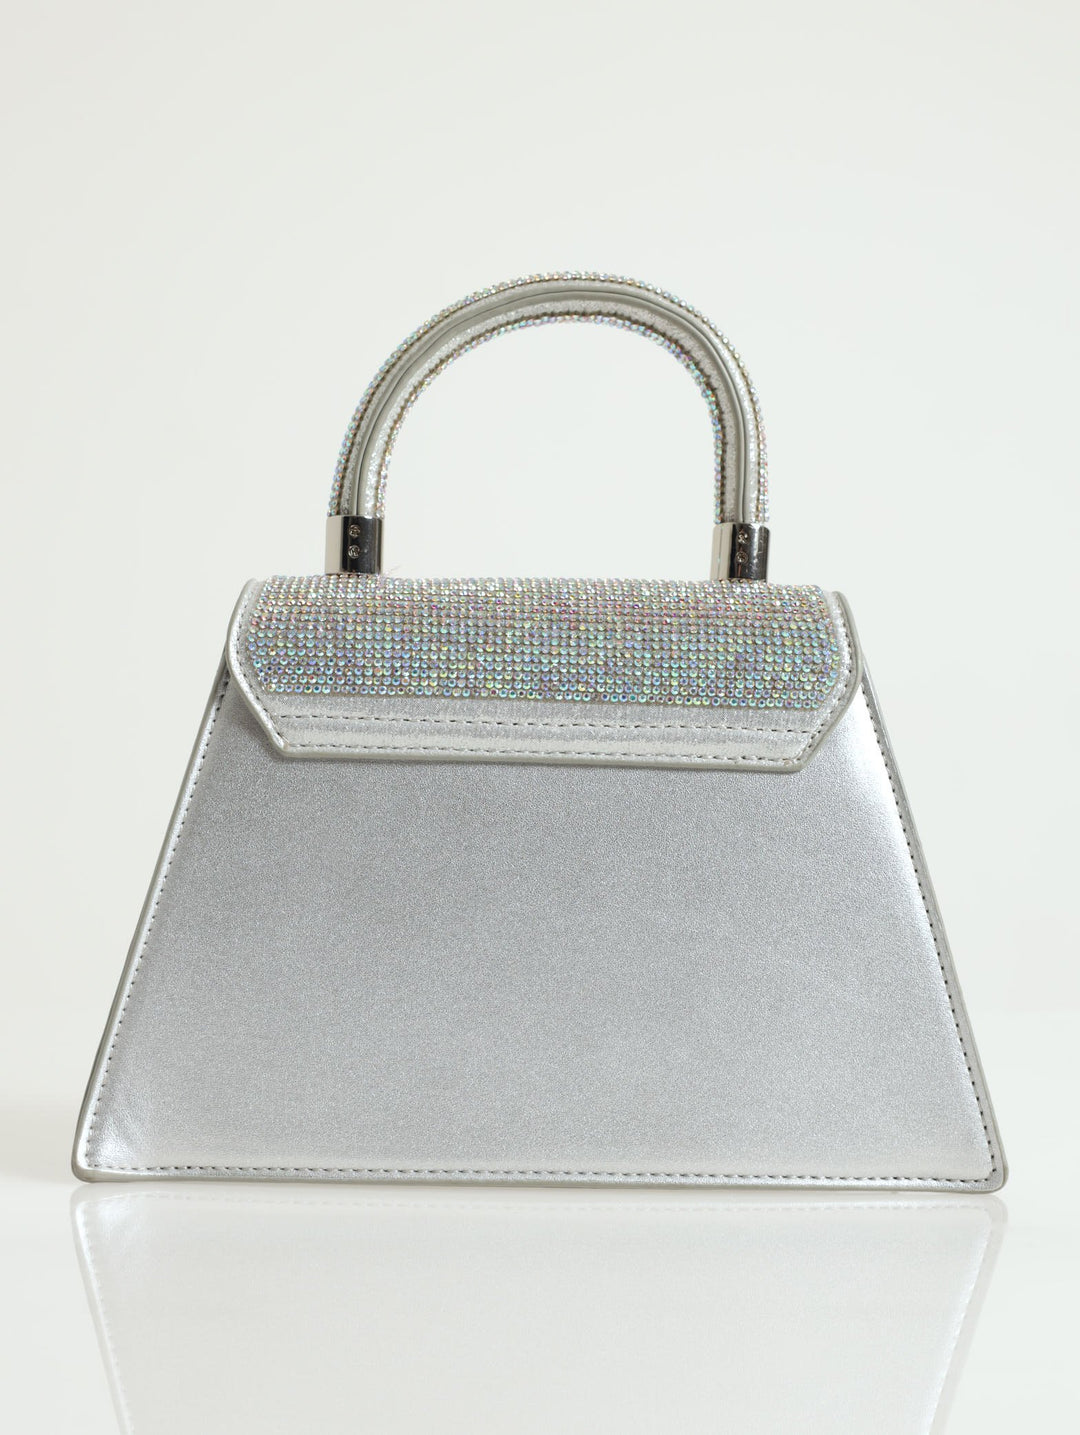 More Is More Bag - Silver